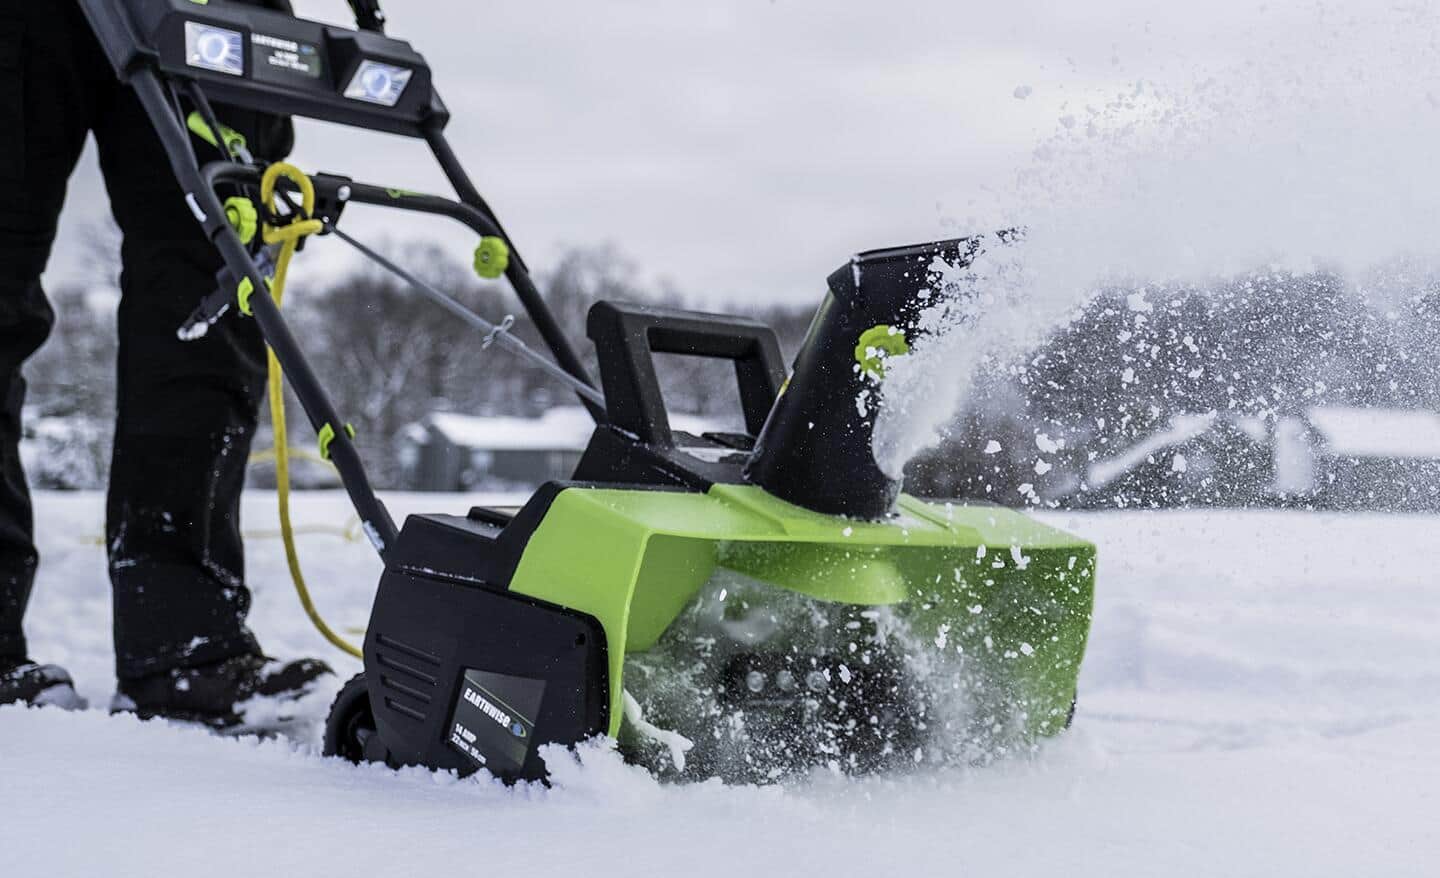 A person clearing snow with a green electric snow blower.